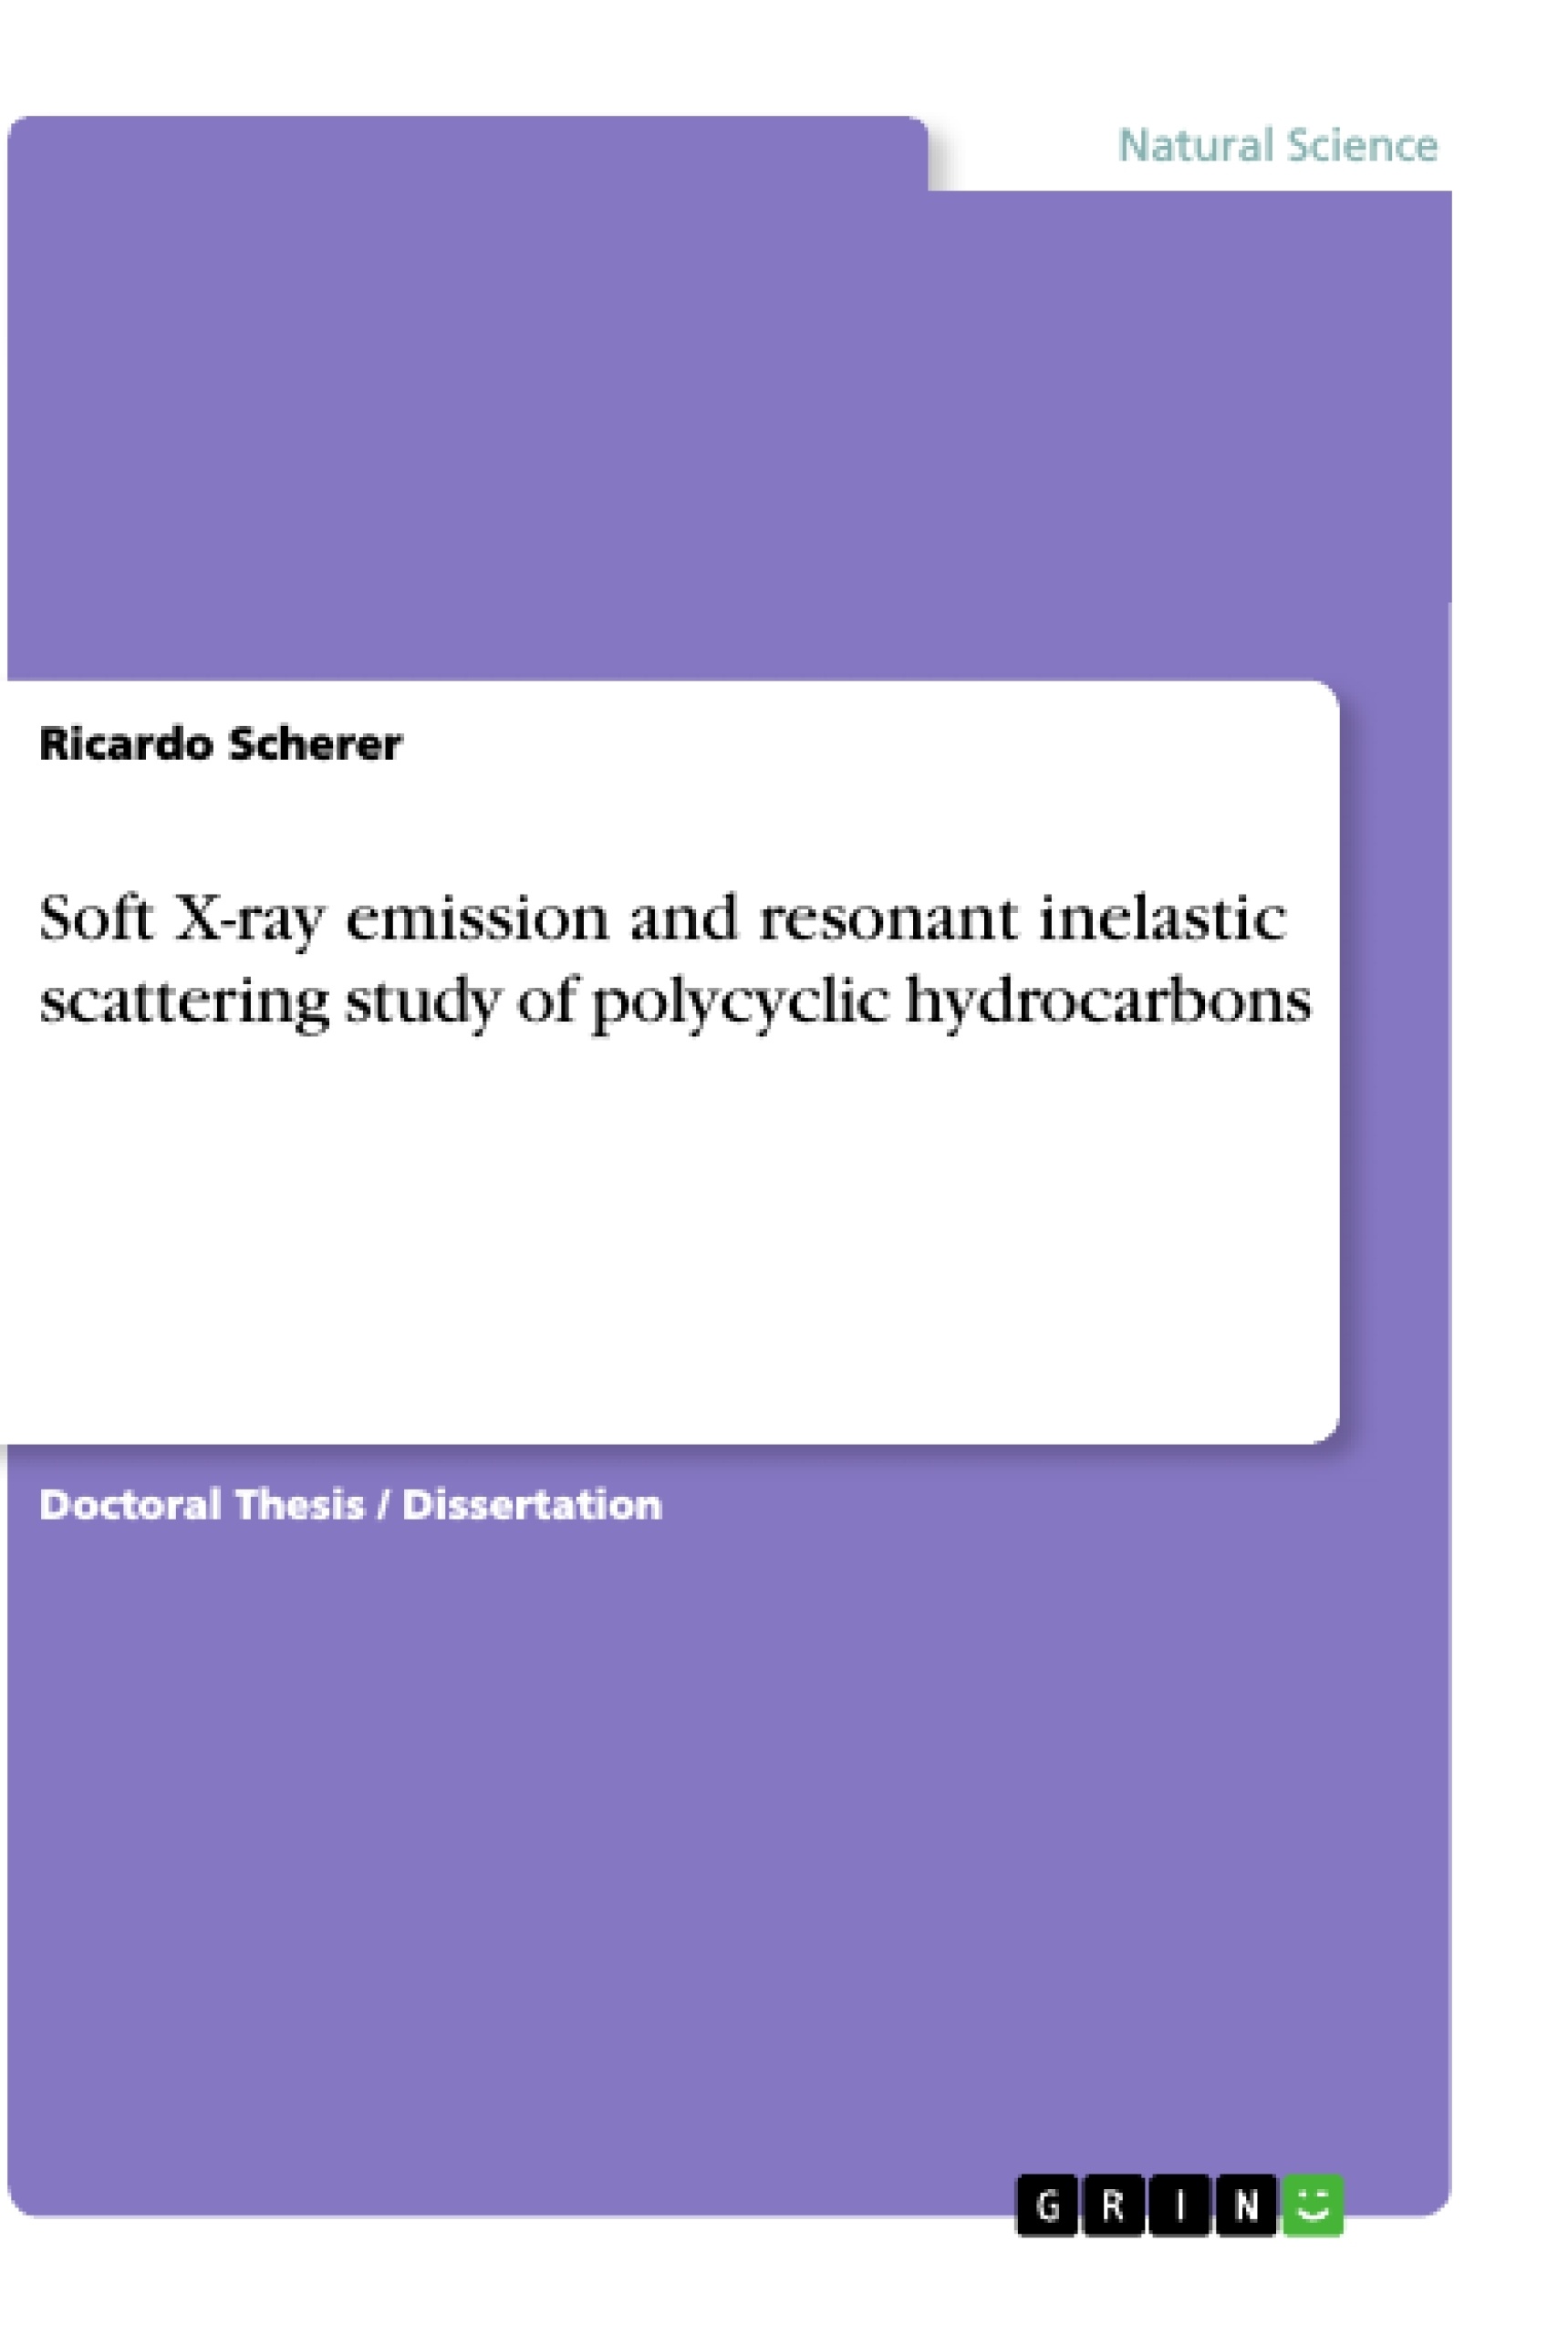 Title: Soft X-ray emission and resonant inelastic scattering study of polycyclic hydrocarbons